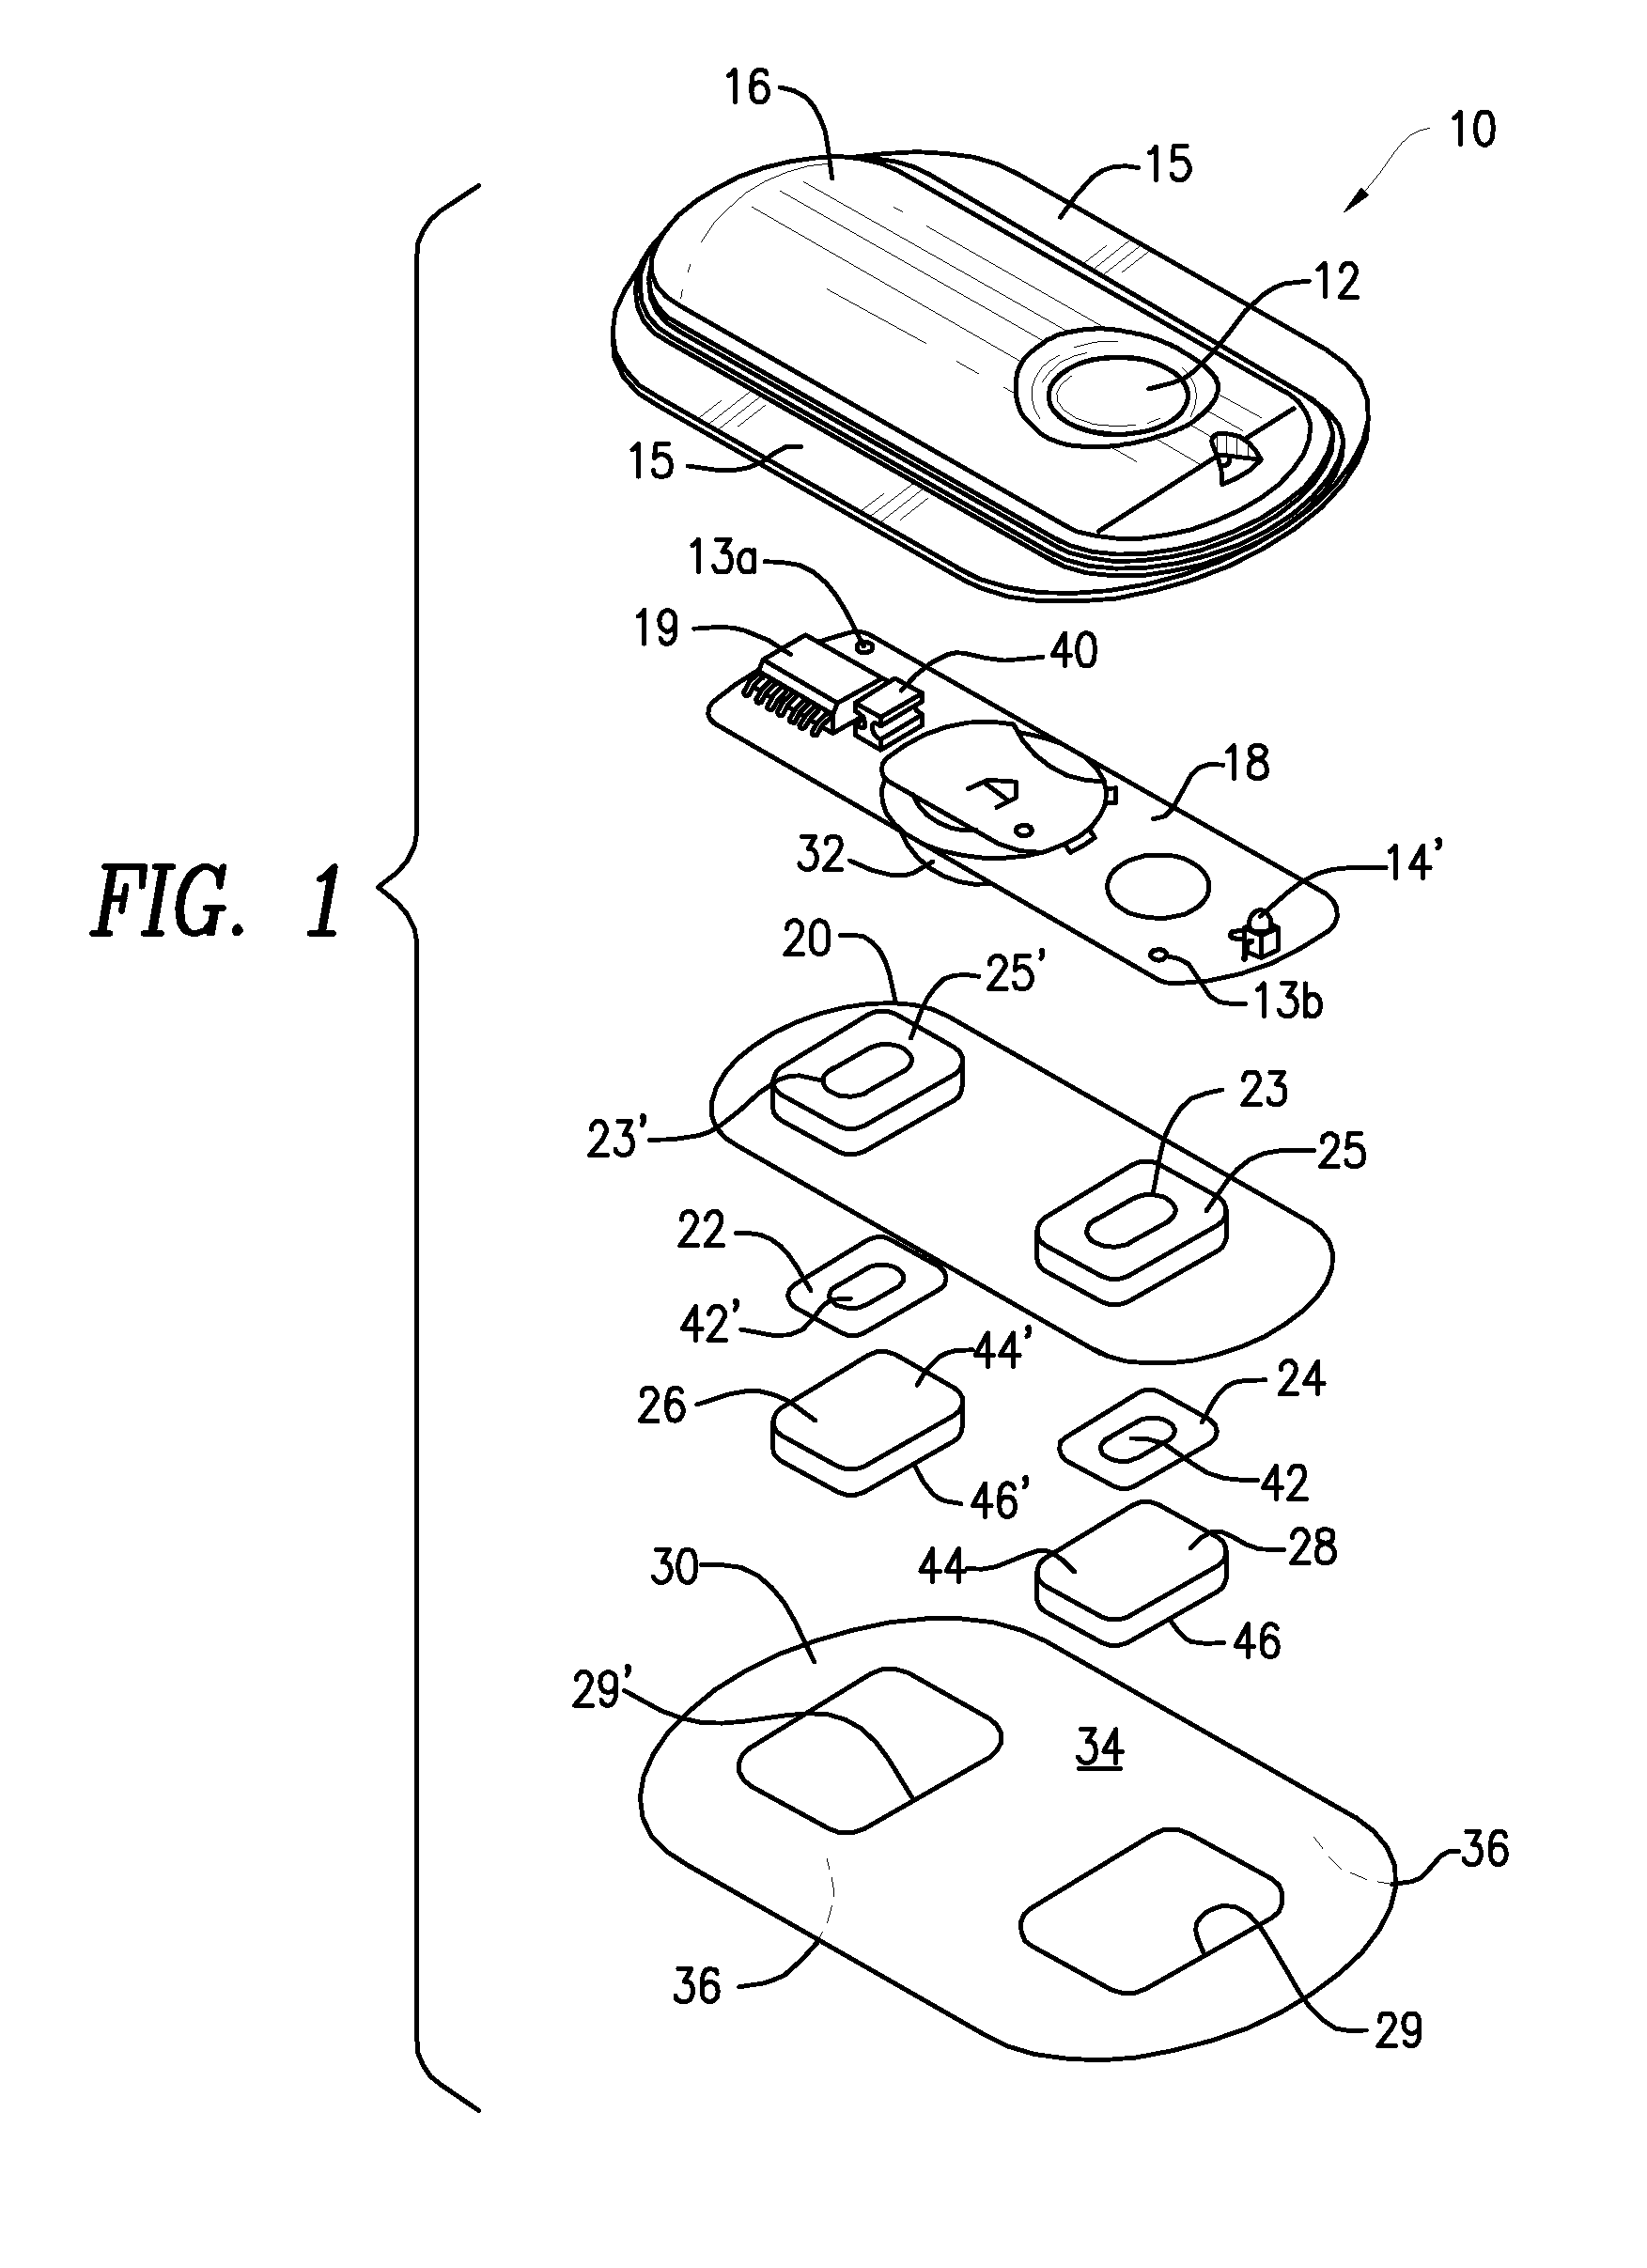 Method and Device for Transdermal Electrotransport Delivery of Fentanyl and Sufentanil